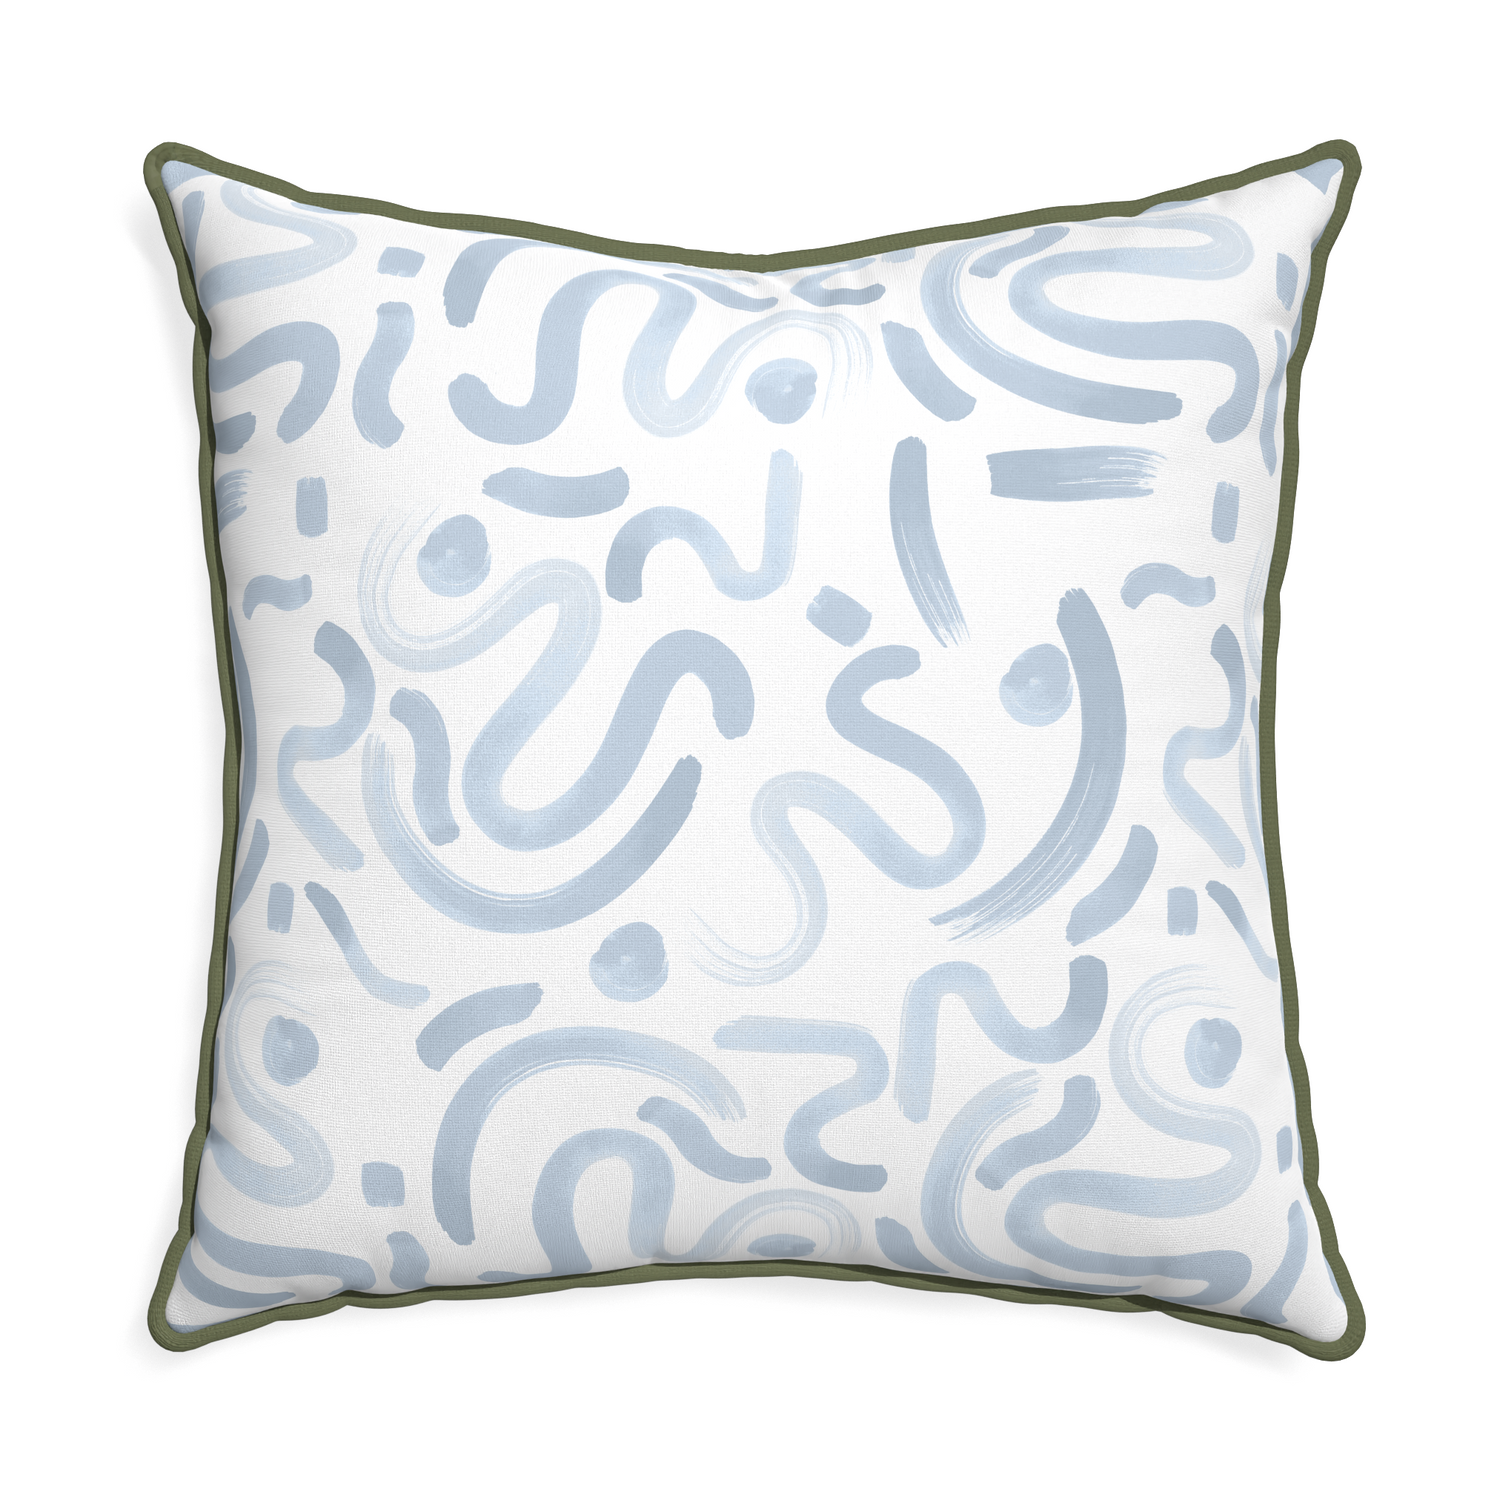 Euro-sham hockney sky custom pillow with f piping on white background